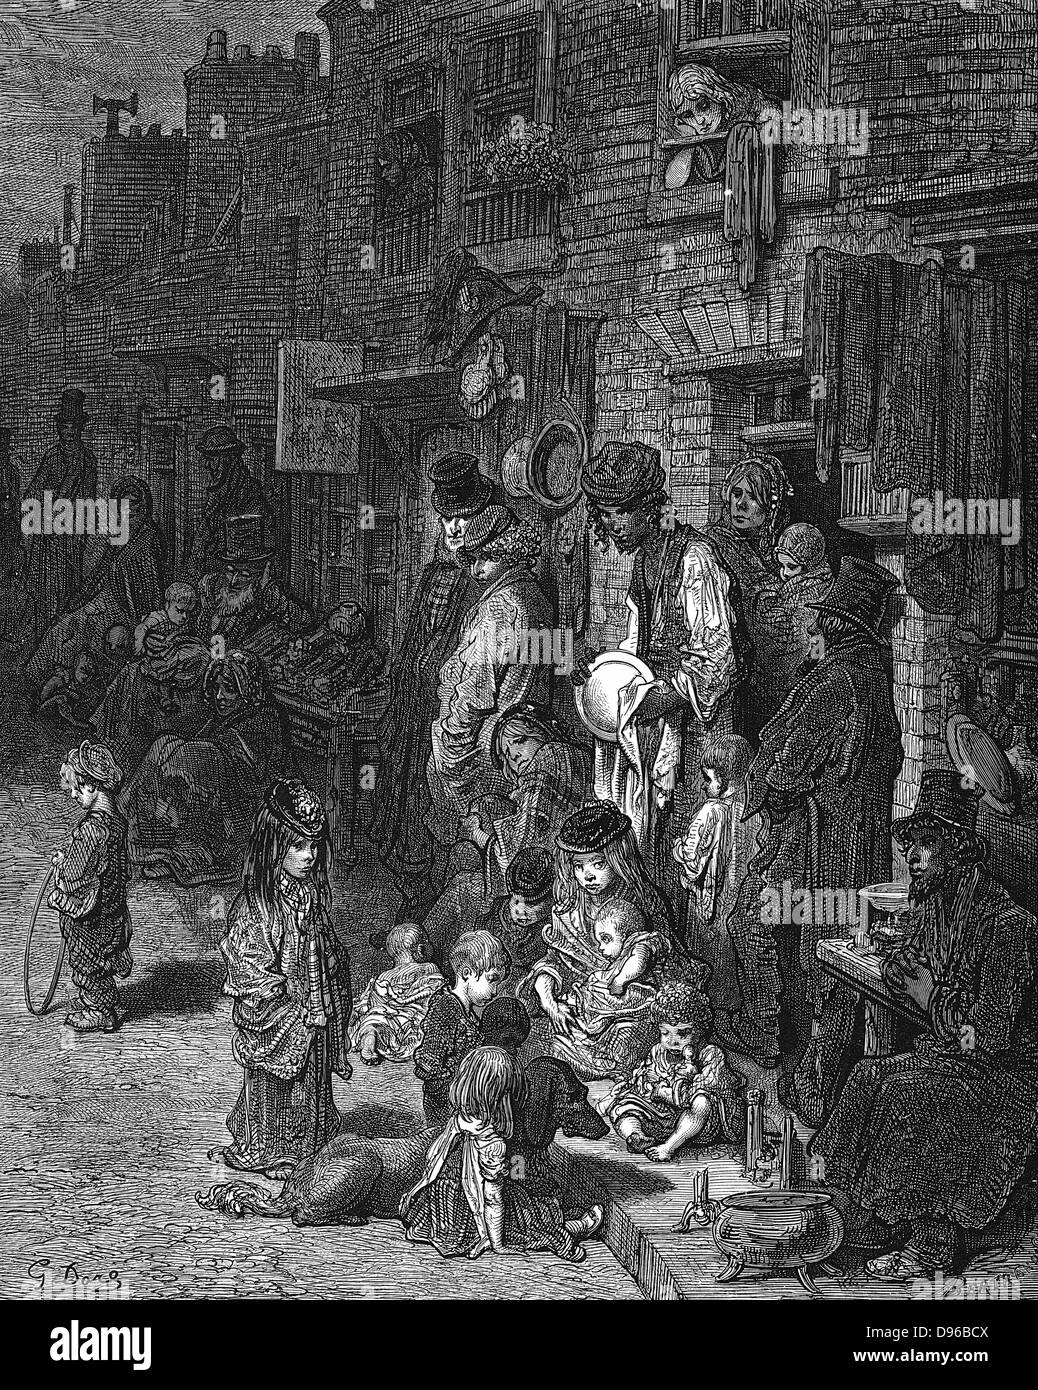 Wentworth Street, Whitechapel', the poor Jewish quarter of the city: From Gustave Dore and Blanchard Jerrold 'London: A Pilgrimage'  London 1872. Wood engraving Stock Photo